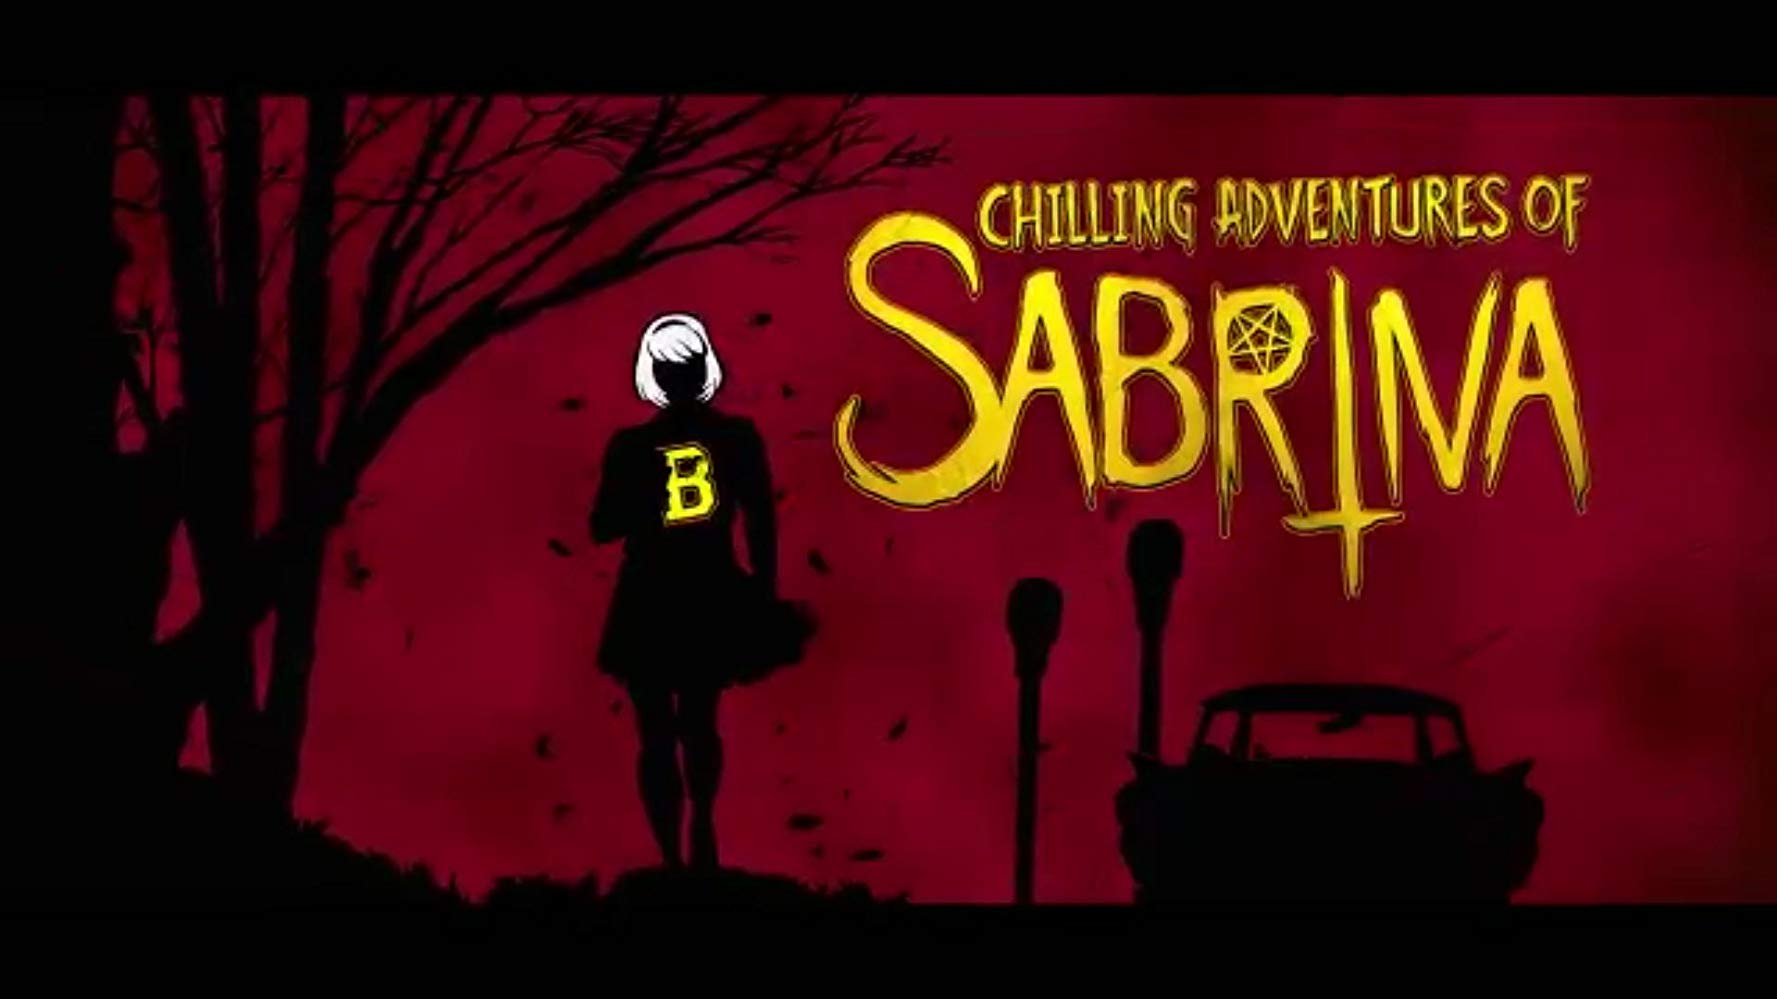 Watch The Chilling Adventures of Sabrina - Season 1